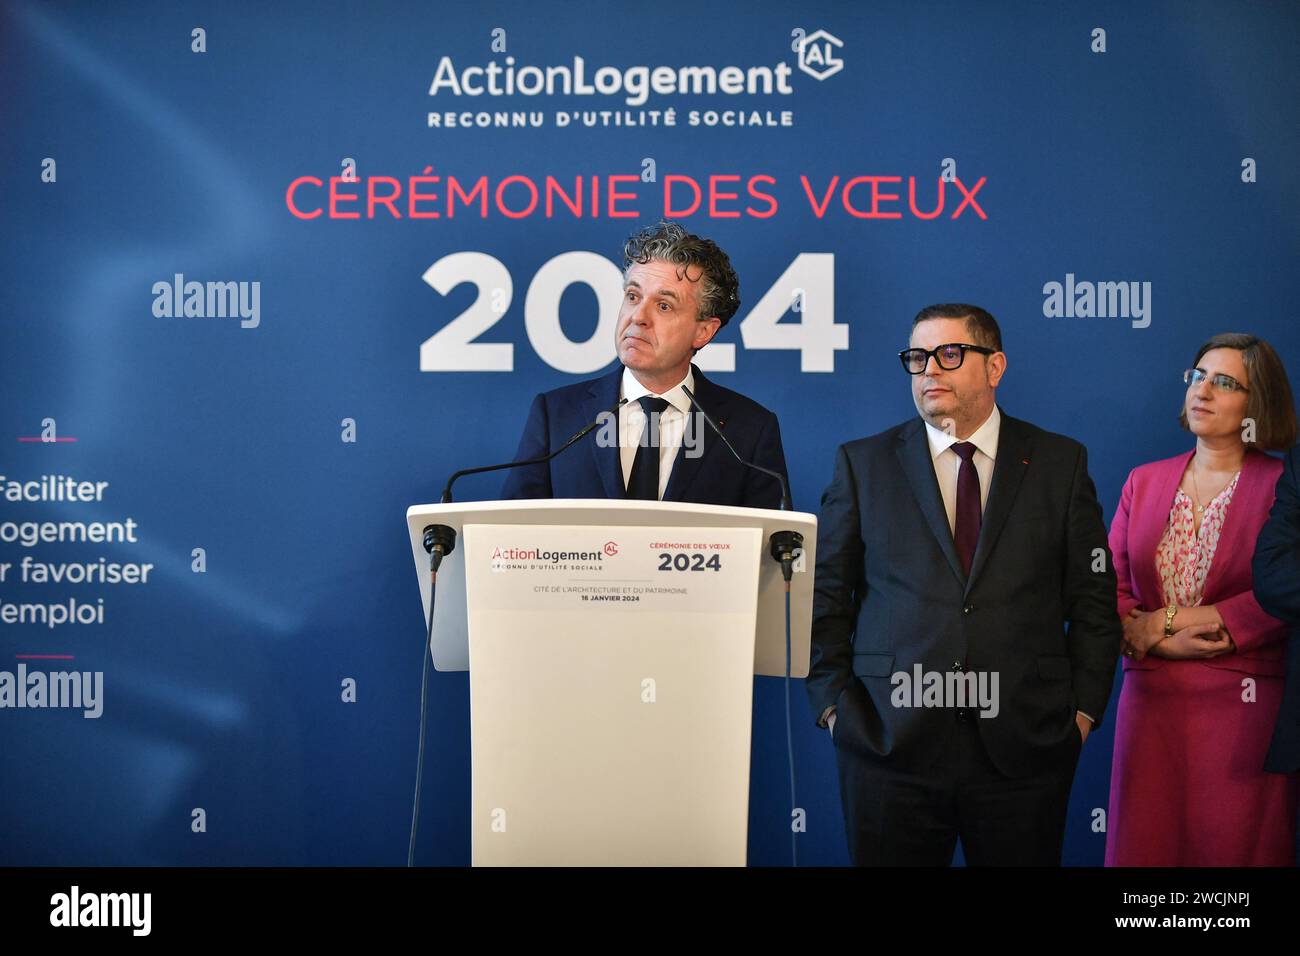 Paris, France. 16th Jan, 2024. French Minister for Ecological Transition and Territories' Cohesion Christophe Bechu speaks next to President of Action Logement, Bruno Arcadipane (2L), and General Manager of Action Logement Nadia Bouyer during the Minister's participation in Action Logement's New Year's ceremony to salute the commitment of the group's teams at the Cite de l'Architecture et du Patrimoine in Paris, on January 16, 2024. Photo by Firas Abdullah/ABACAPRESS.COM Credit: Abaca Press/Alamy Live News Stock Photo